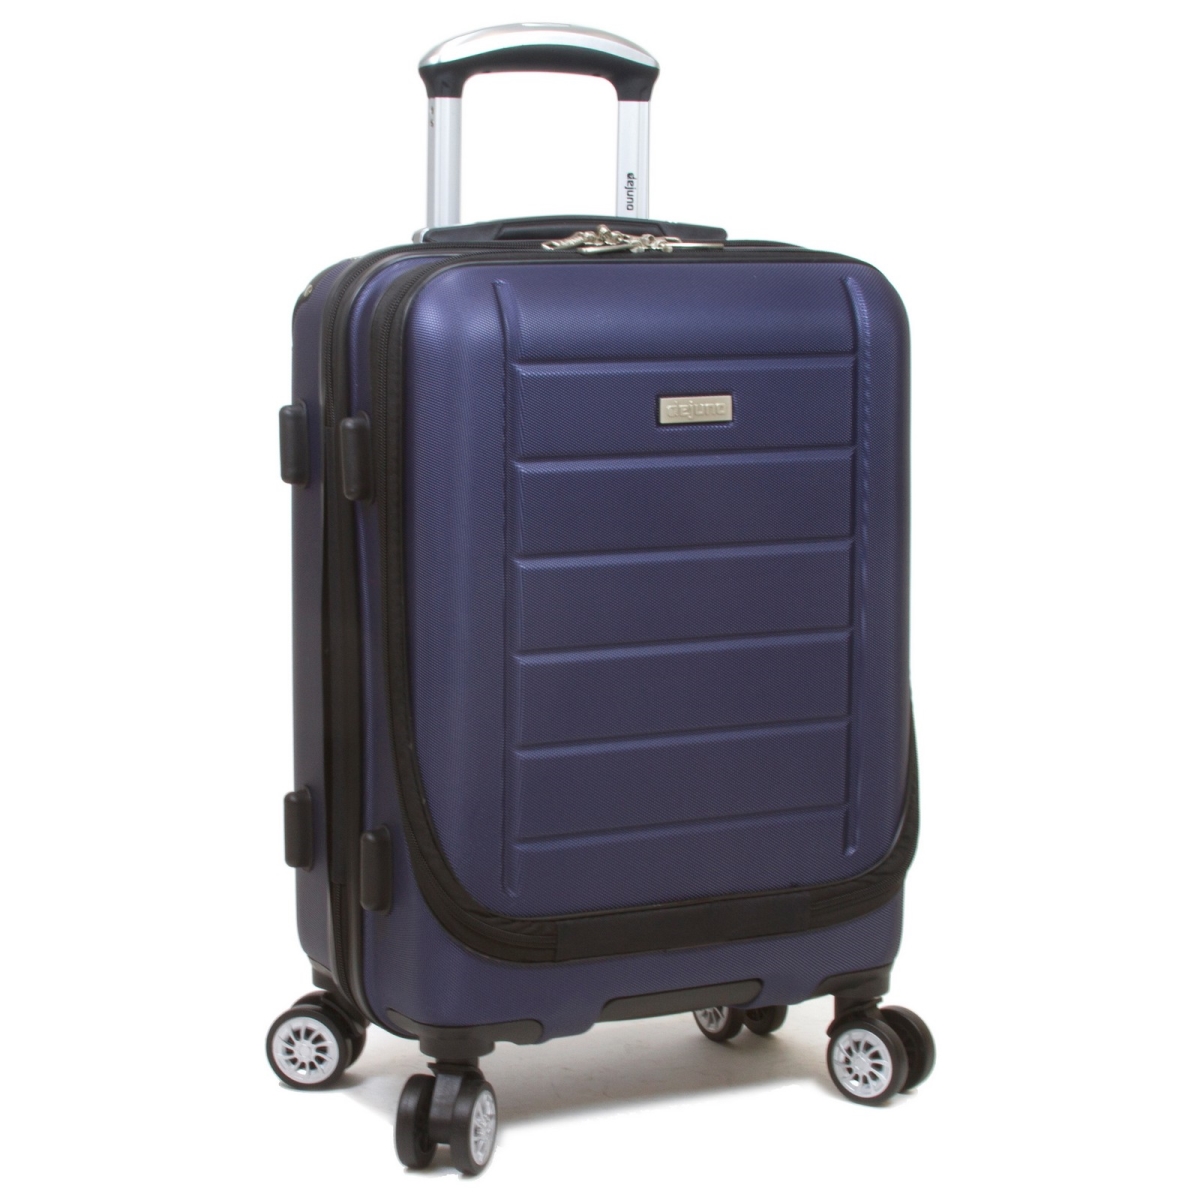 25dj-9902-navy 20 In. Compact Hardside Carry-on Luggage With Laptop Pocket, Navy